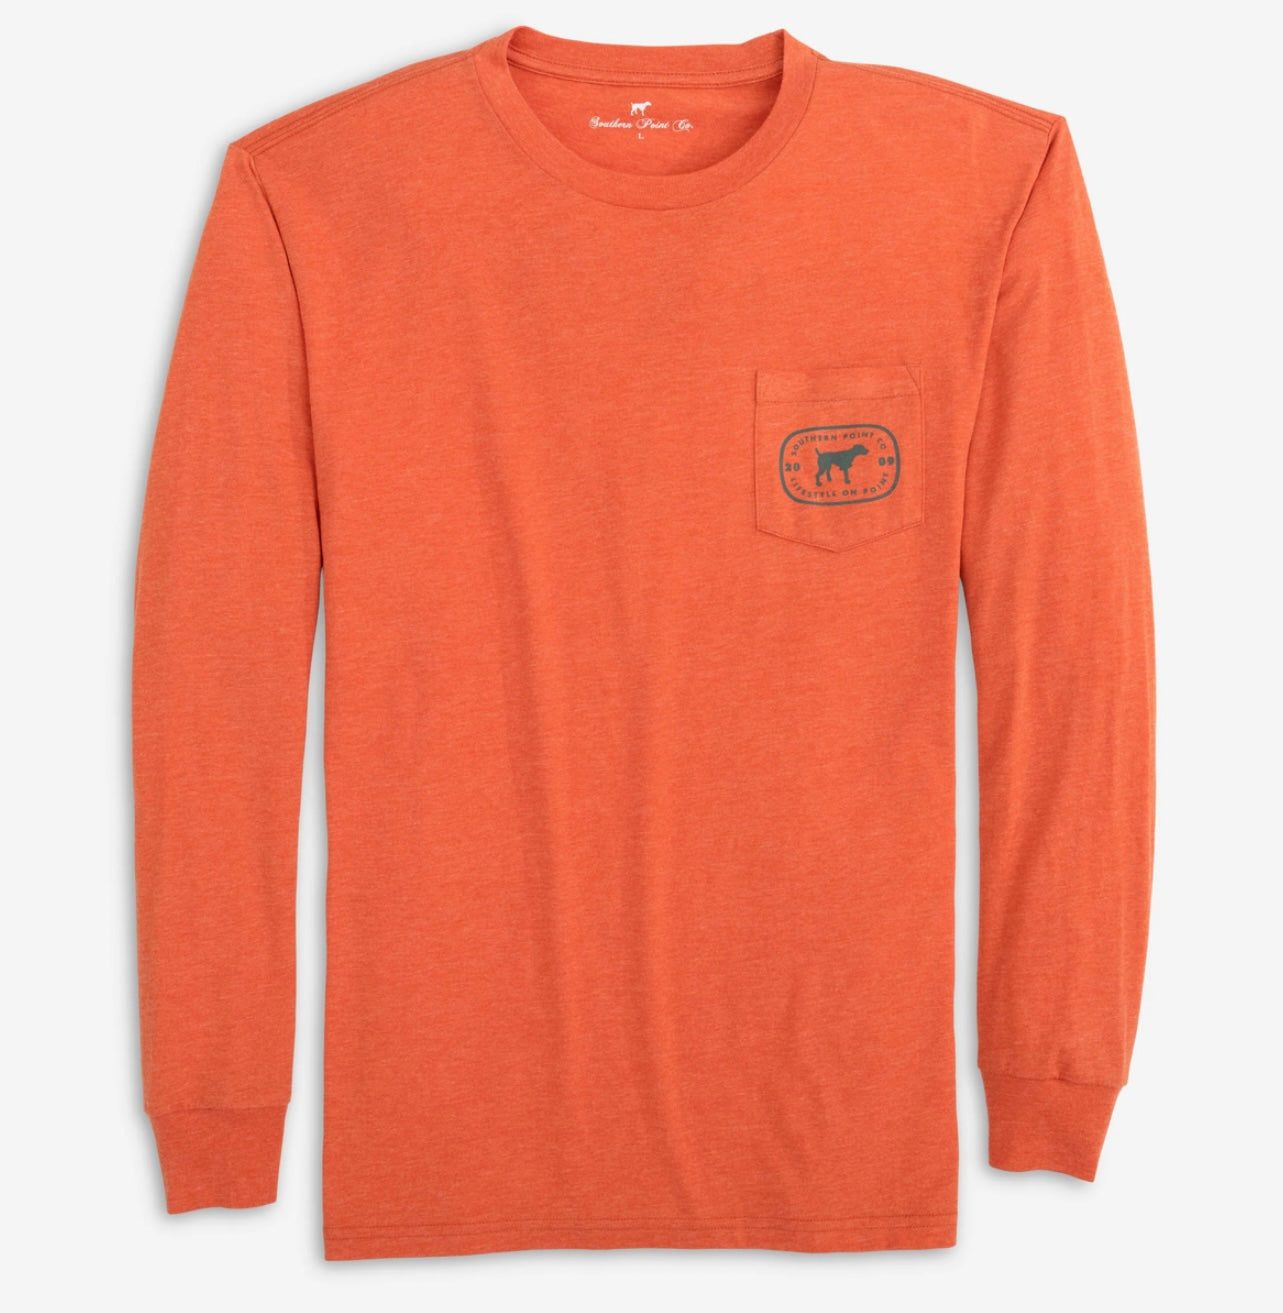 Vintage Trademark Long Sleeve Tee by Southern Point Co.